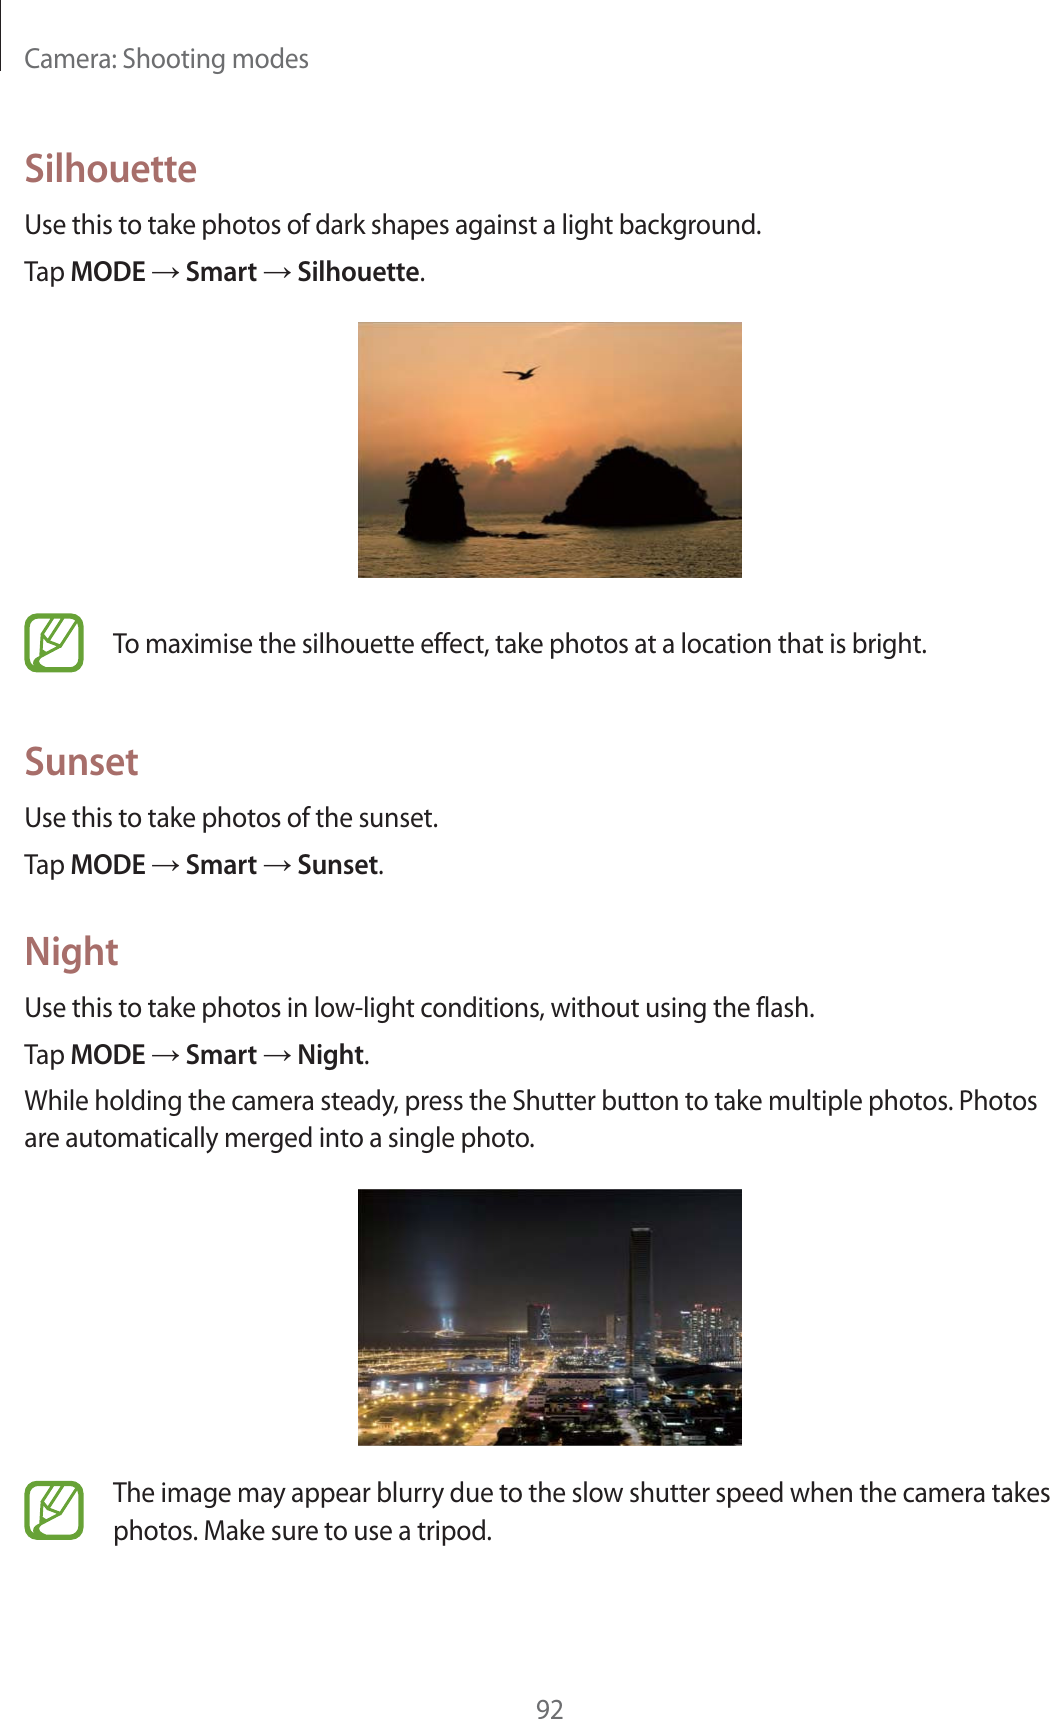 Camera: Shooting modes92SilhouetteUse this to take photos of dark shapes against a light background.Tap MODE  Smart  Silhouette.To maximise the silhouette effect, take photos at a location that is bright.SunsetUse this to take photos of the sunset.Tap MODE  Smart  Sunset.NightUse this to take photos in low-light conditions, without using the flash.Tap MODE  Smart  Night.While holding the camera steady, press the Shutter button to take multiple photos. Photos are automatically merged into a single photo.The image may appear blurry due to the slow shutter speed when the camera takes photos. Make sure to use a tripod.